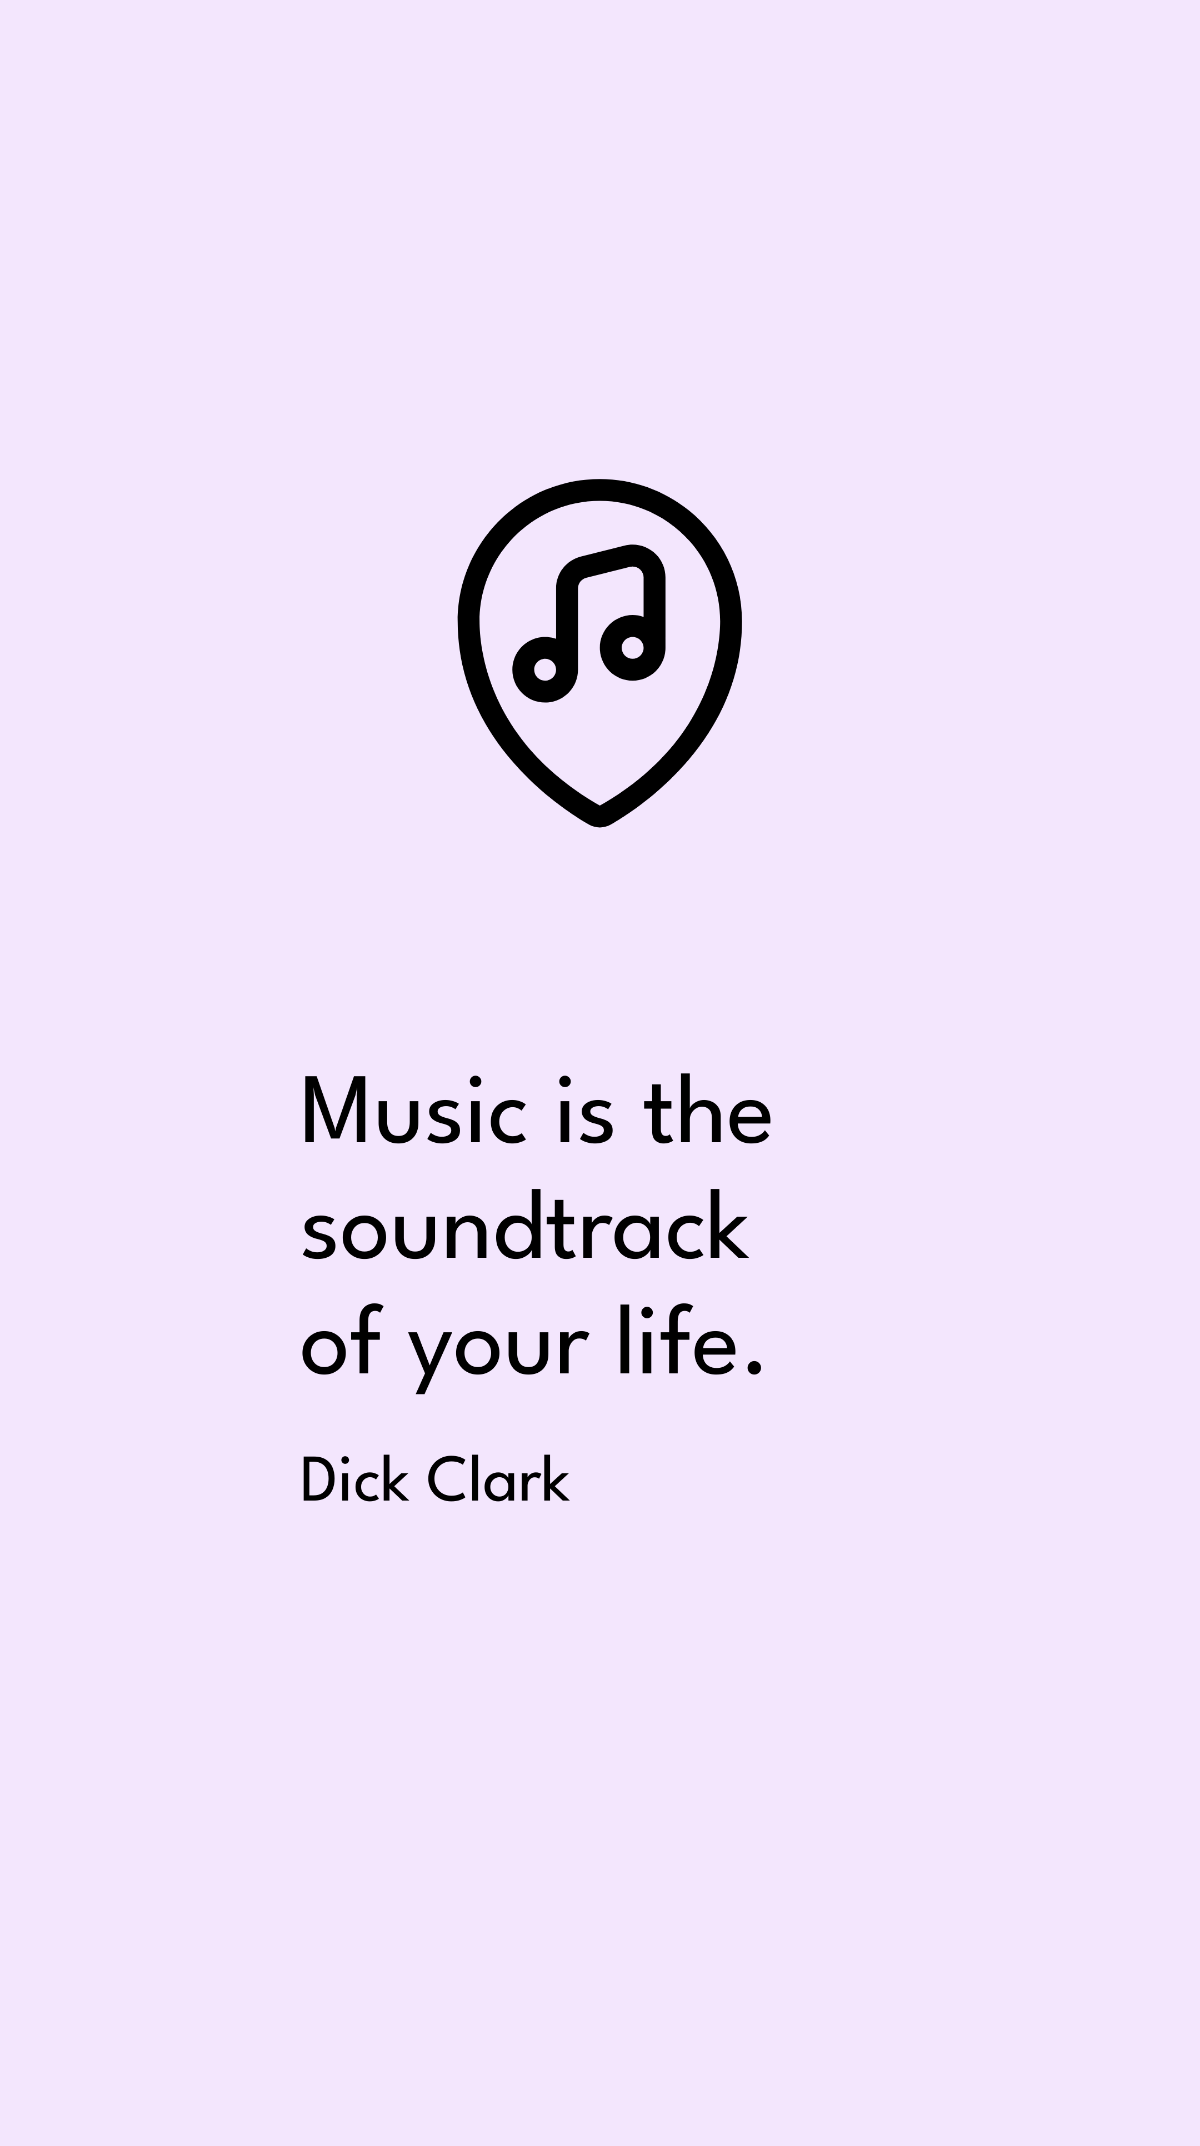 Dick Clark - Music is the soundtrack of your life.